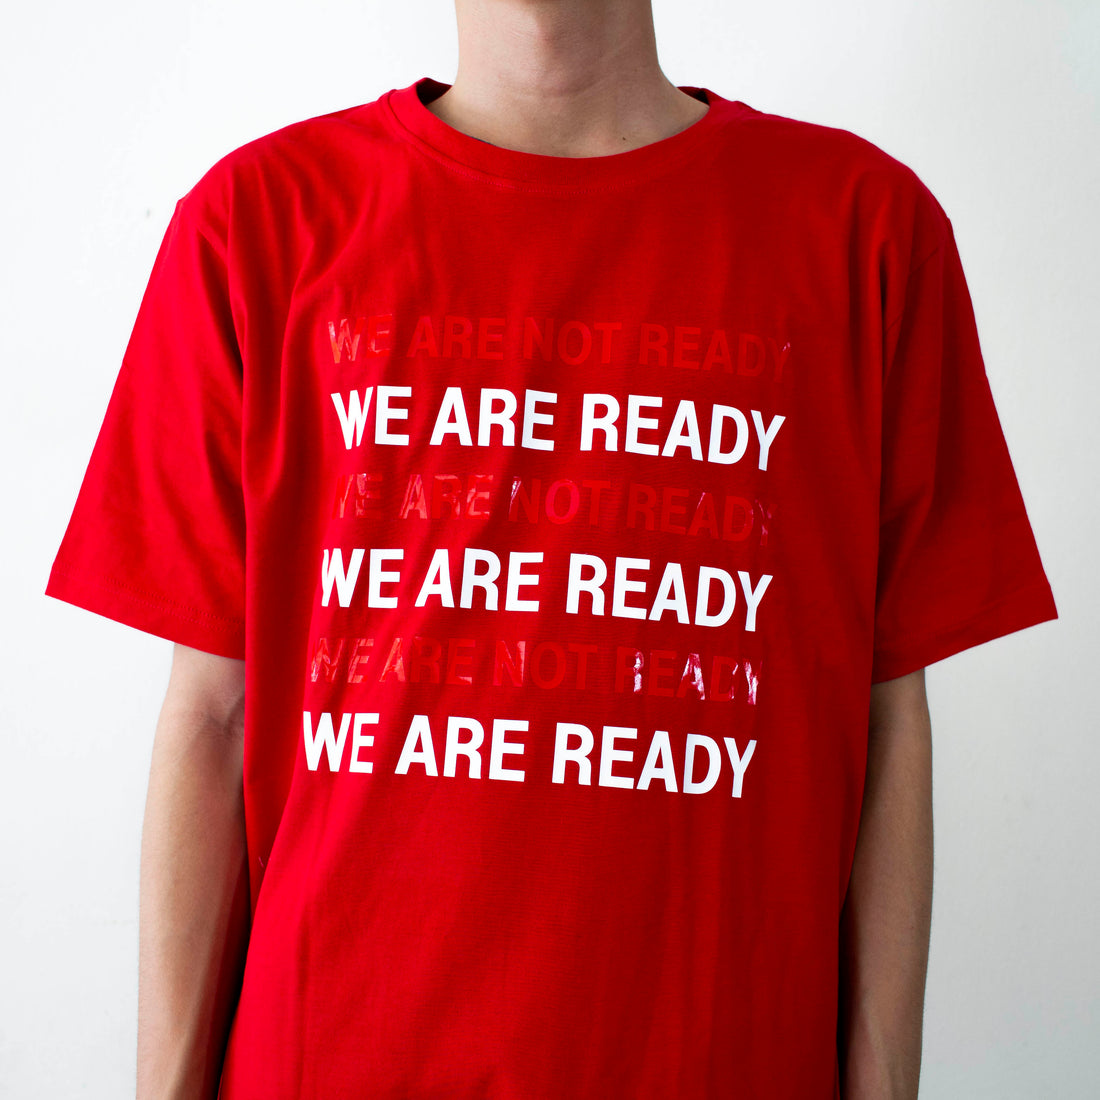 WE ARE (NOT) READY T-shirt